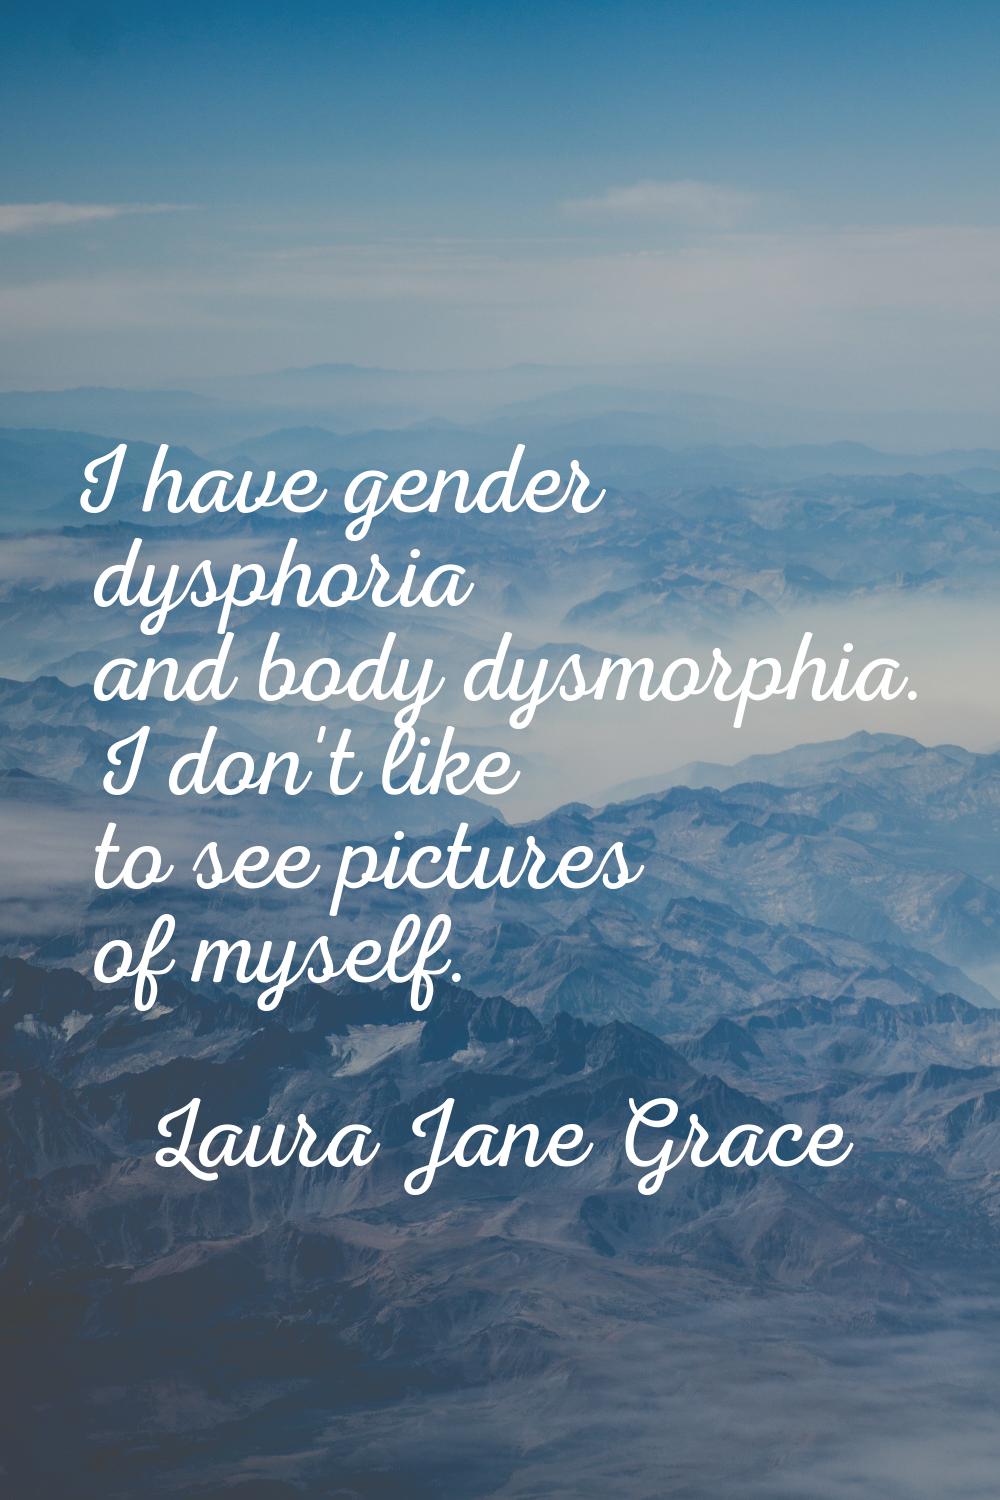 I have gender dysphoria and body dysmorphia. I don't like to see pictures of myself.